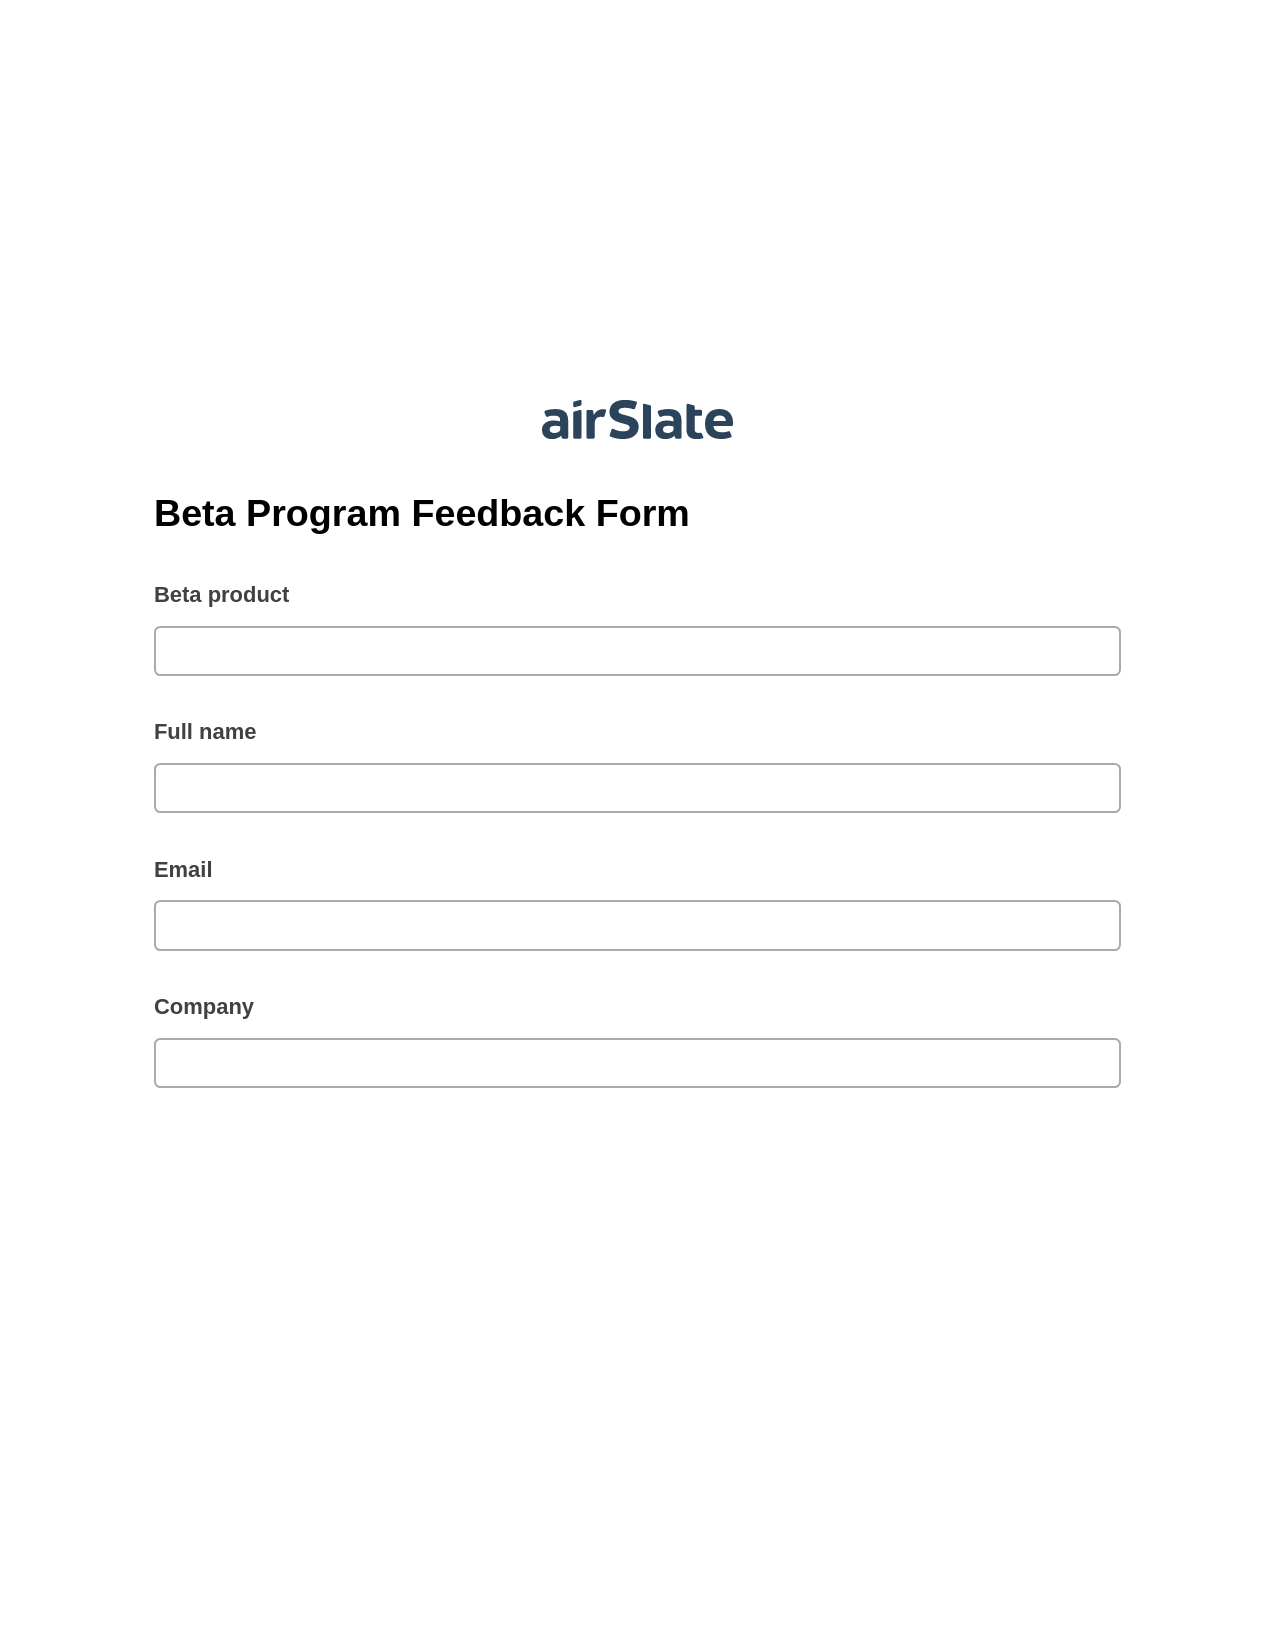 Beta Program Feedback Form Pre-fill Slate from MS Dynamics 365 Records Bot, Webhook Bot, Export to Excel 365 Bot